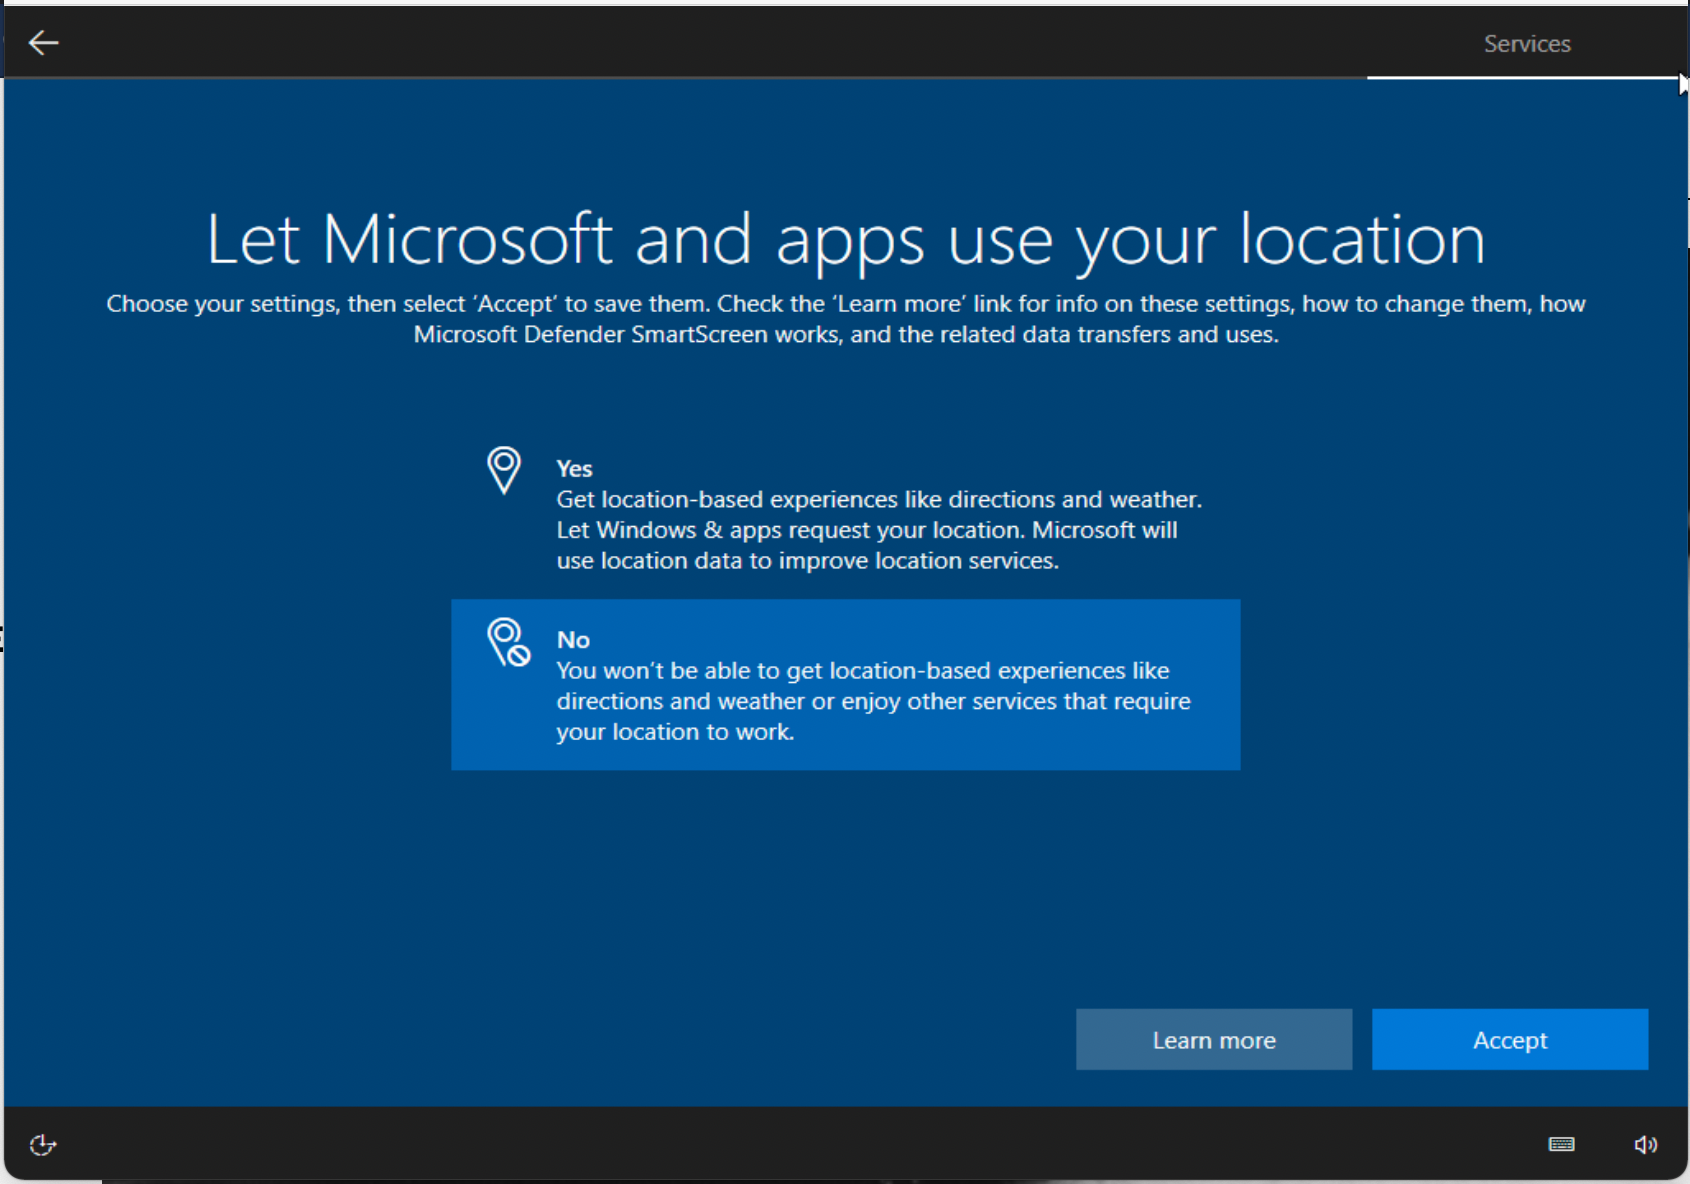 Let Microsoft use your location